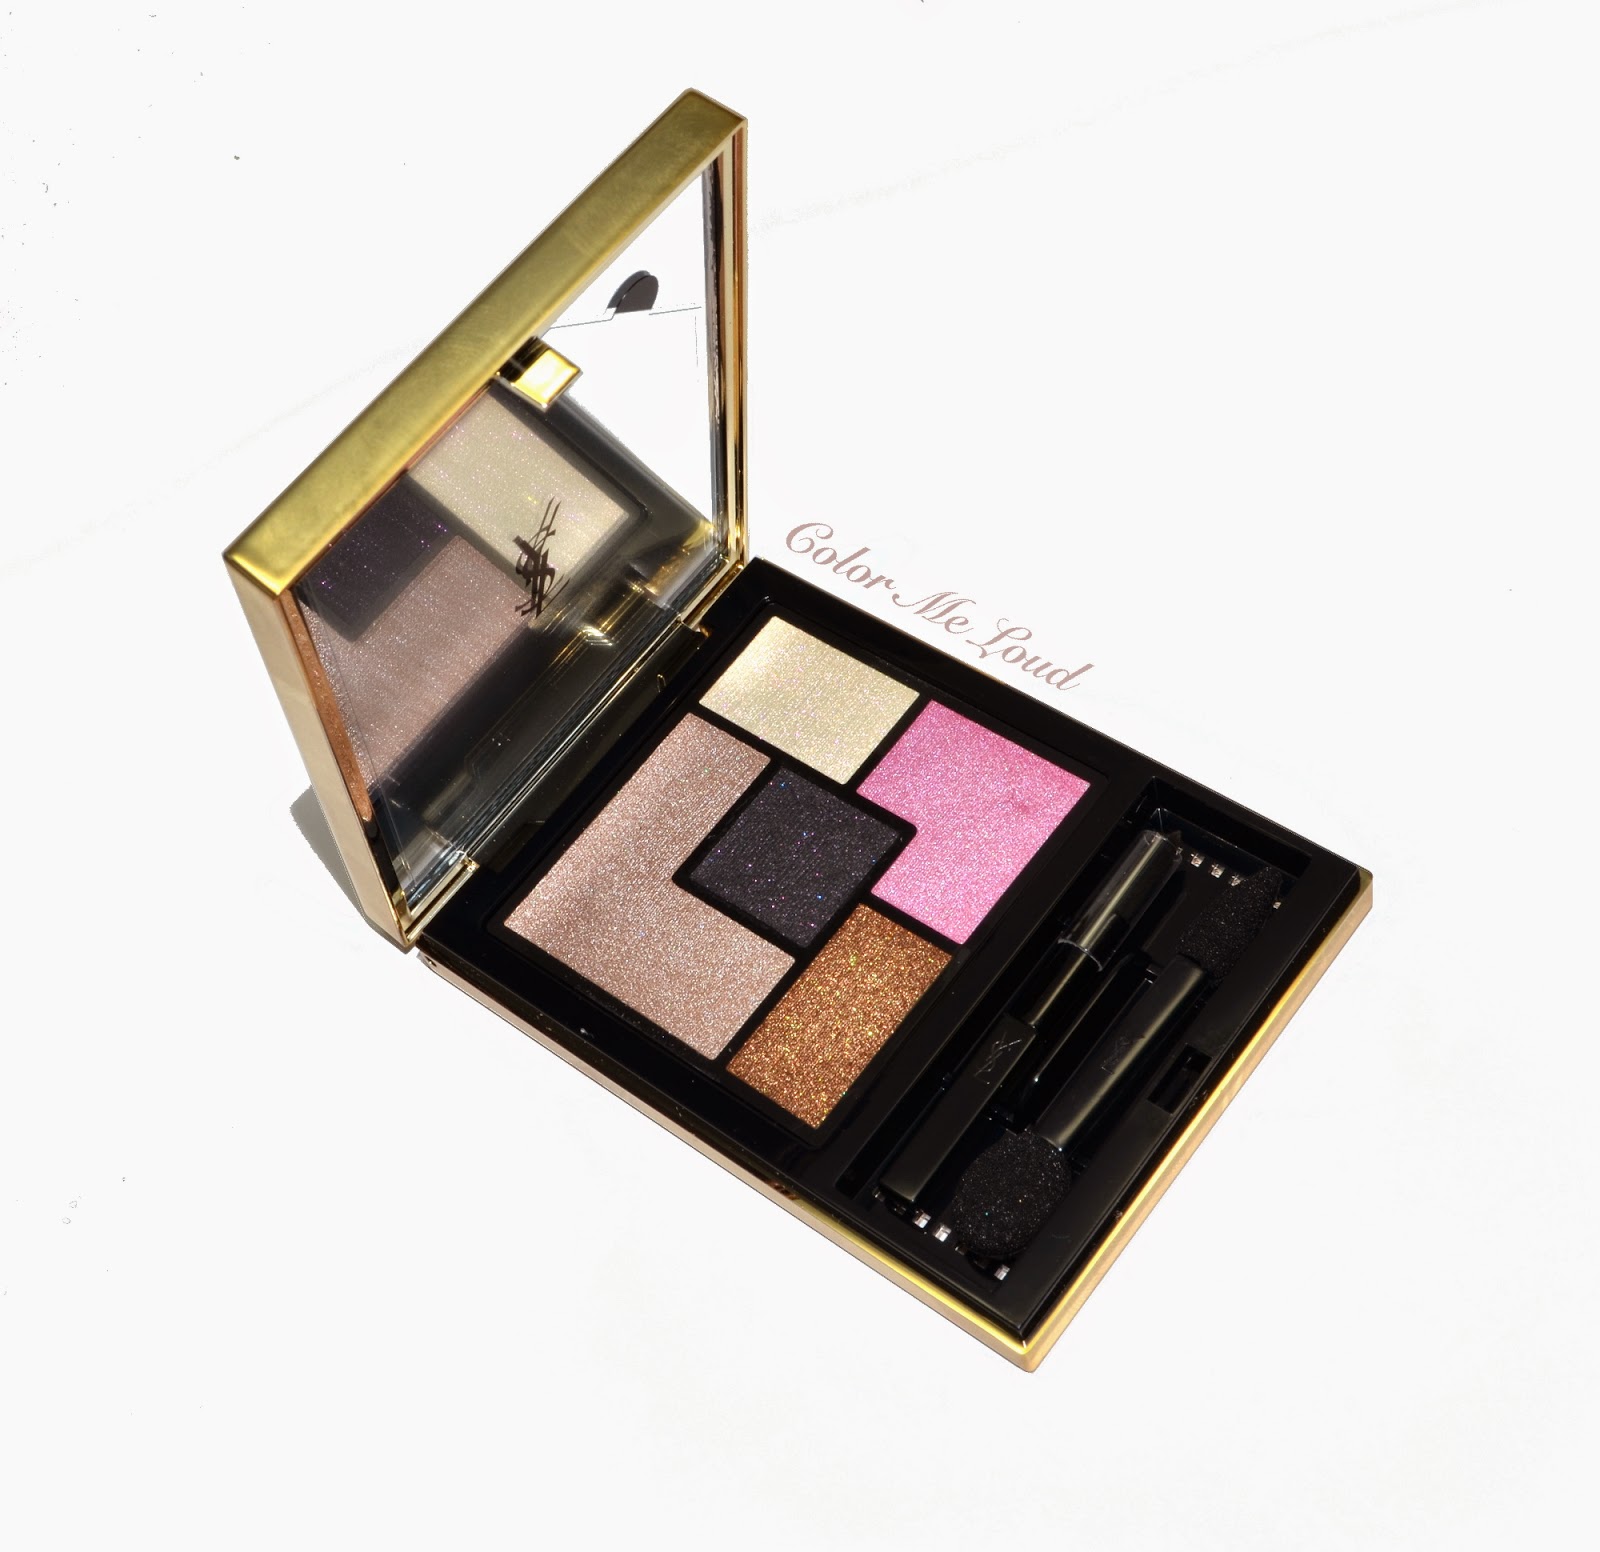 YSL Ombres De Jour Eye Shadow Palette Review, Swatch & FOTD, for Spring 2015